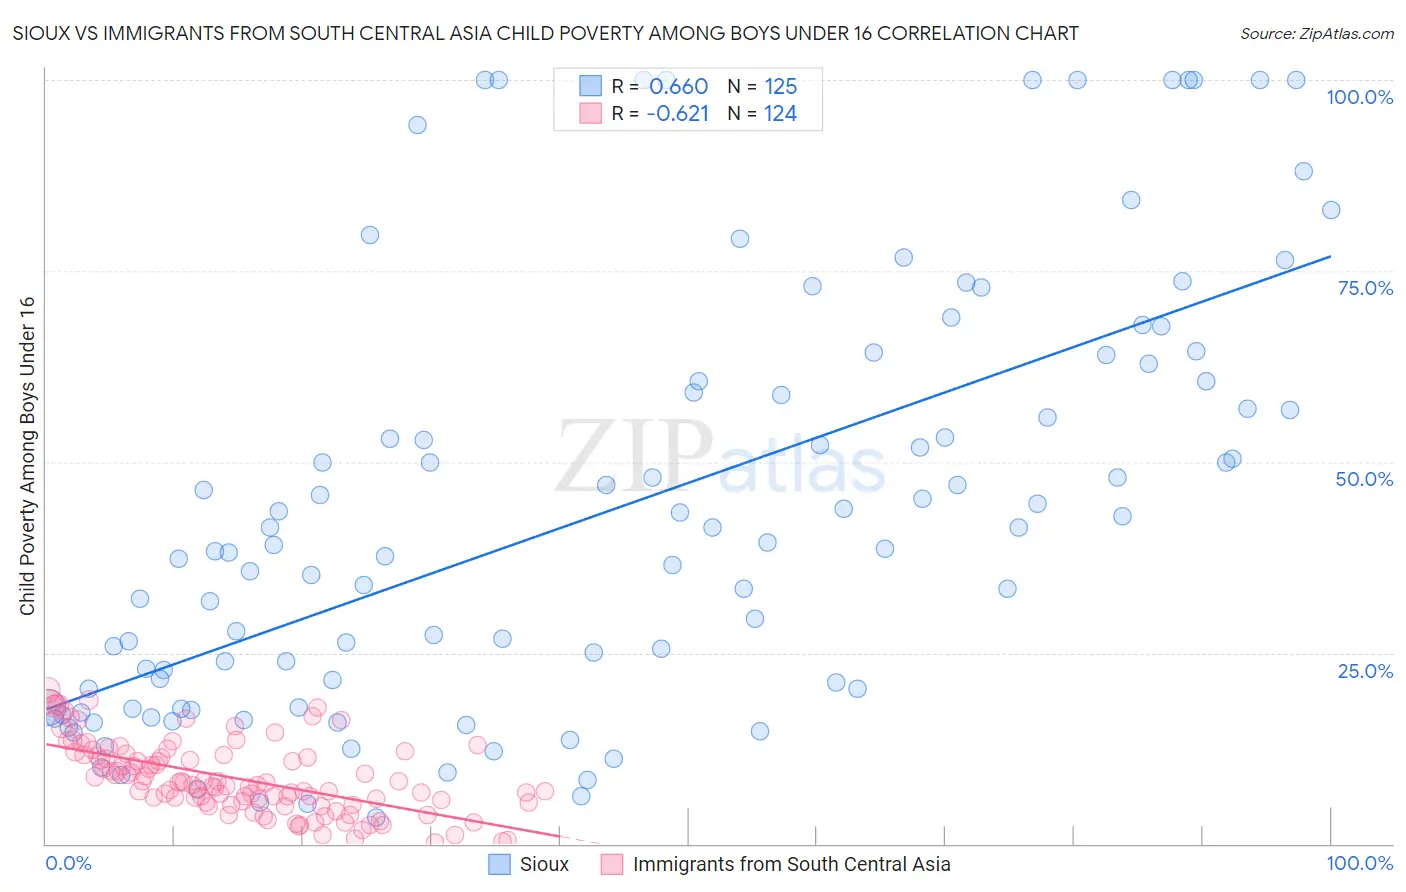 Sioux vs Immigrants from South Central Asia Child Poverty Among Boys Under 16